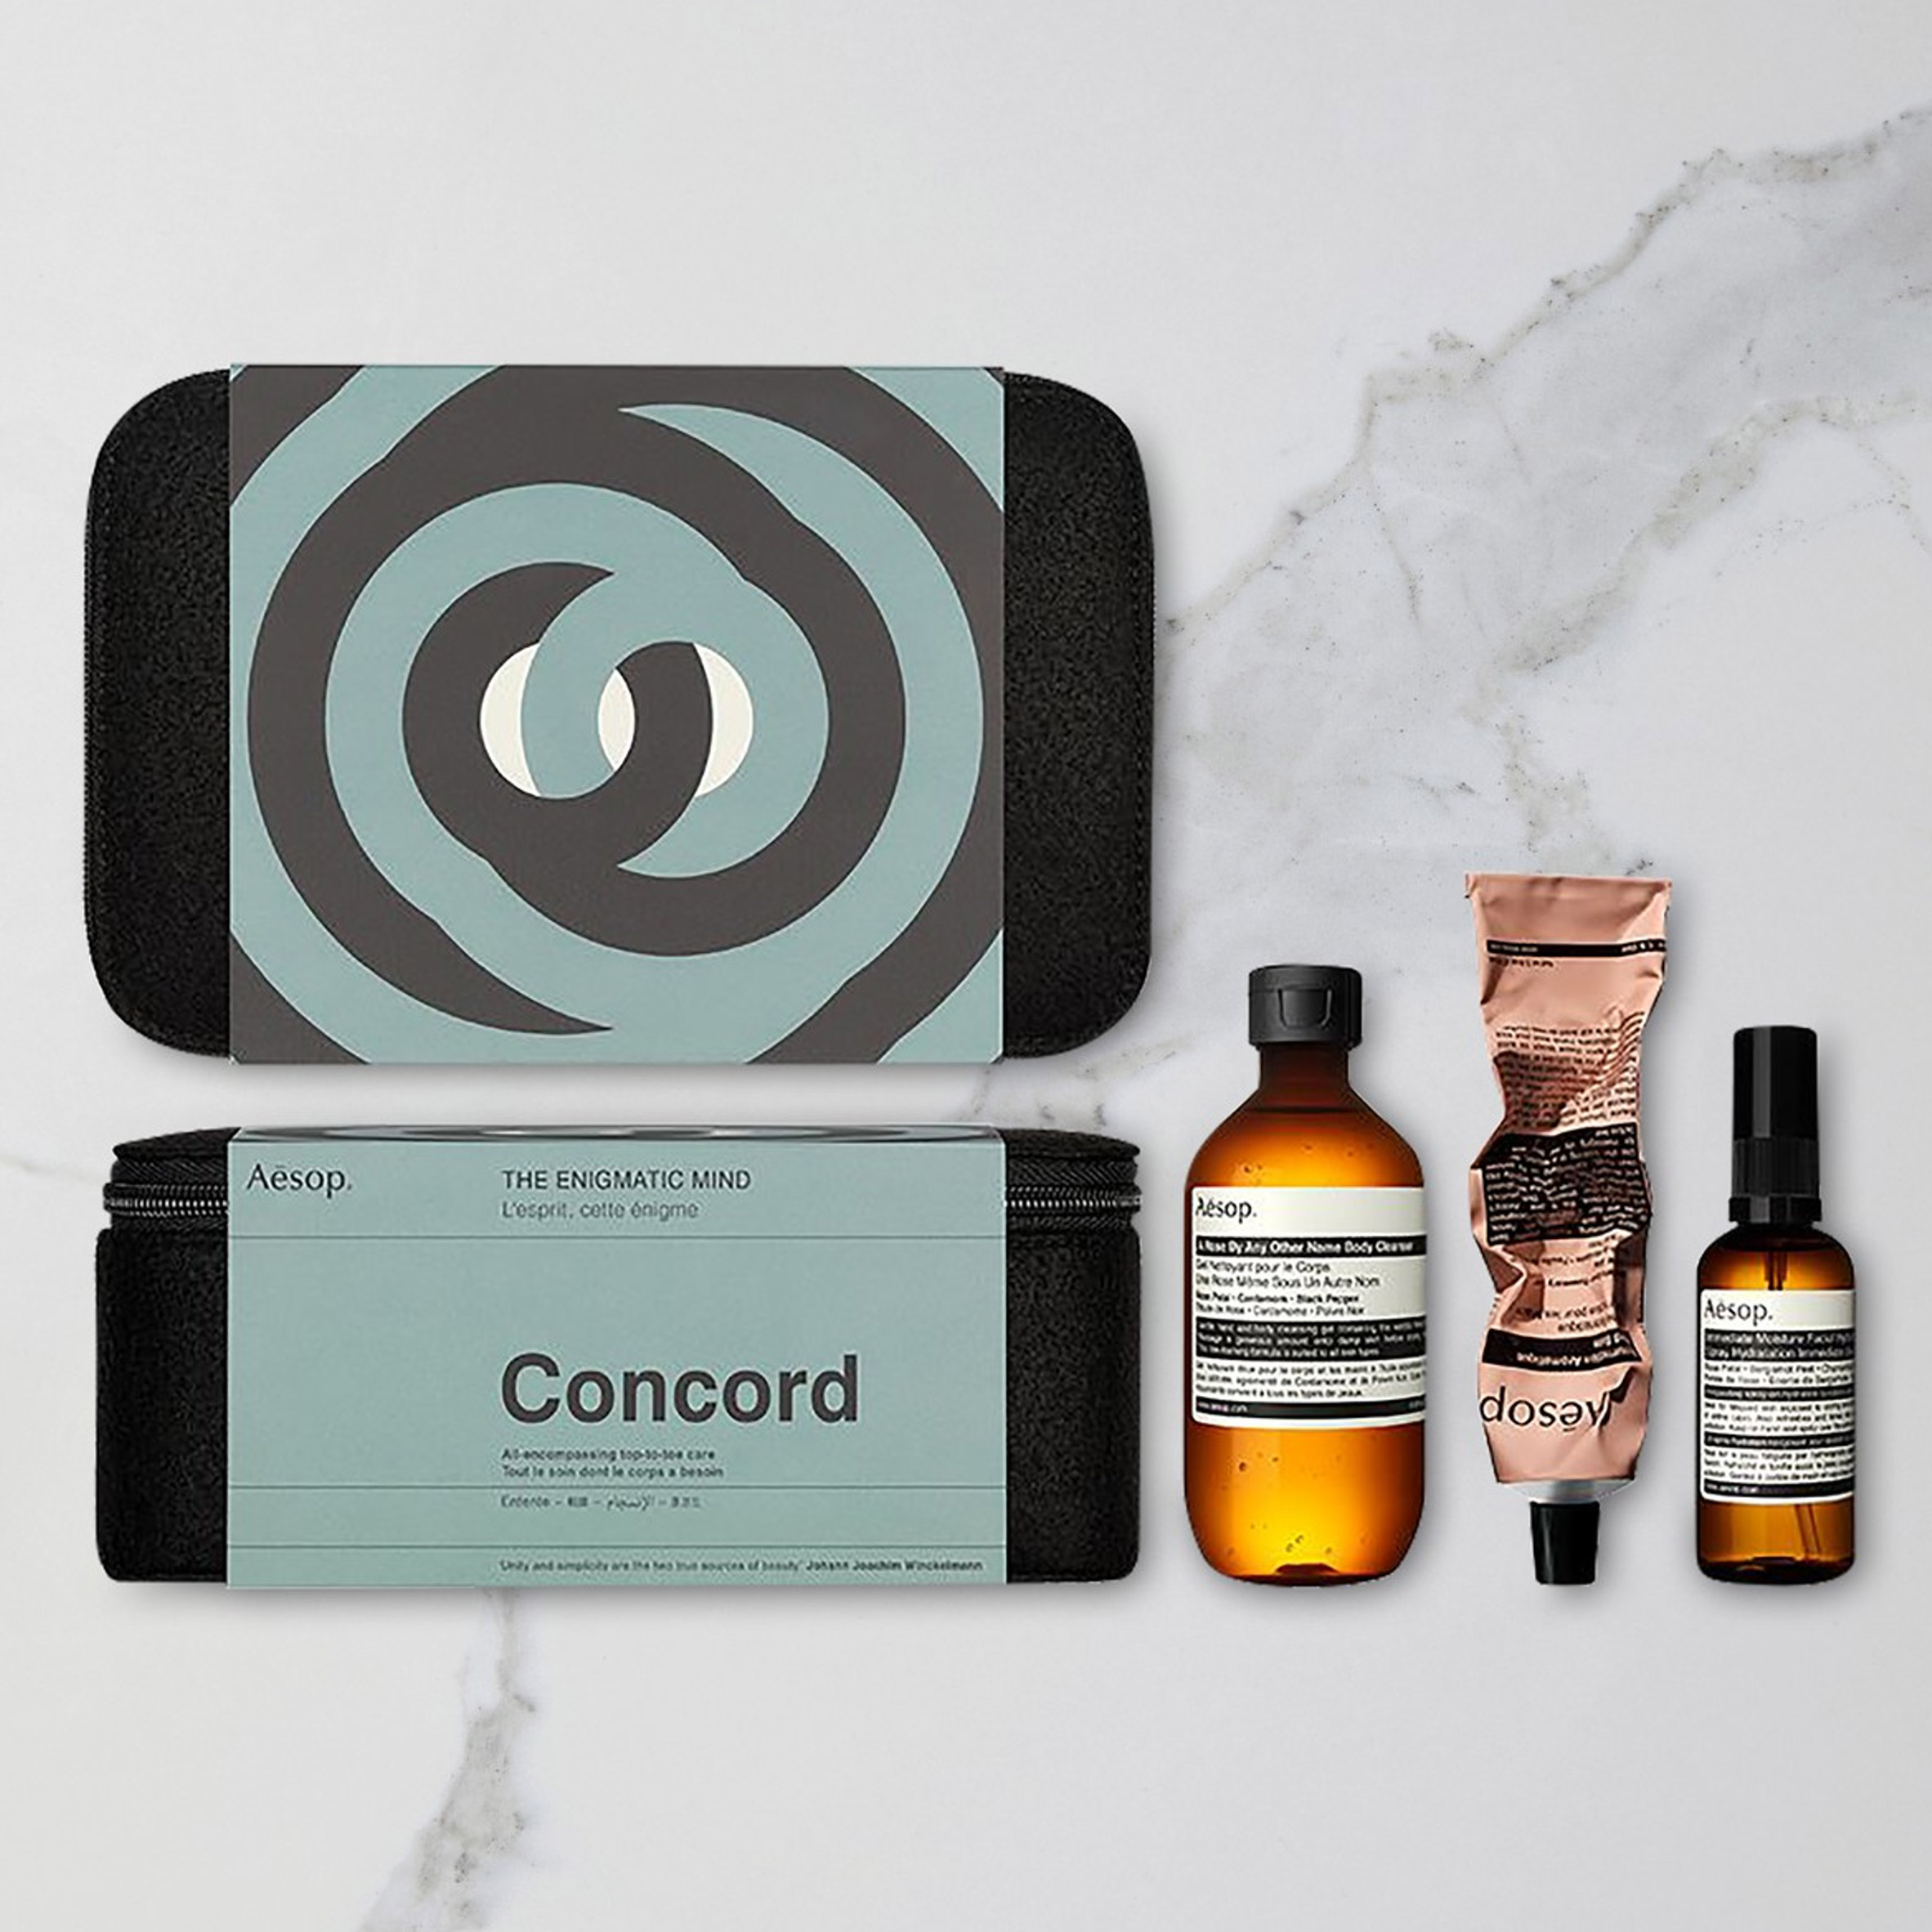 Christmas 2018 gifts for architects and designers: Concord by Aesop